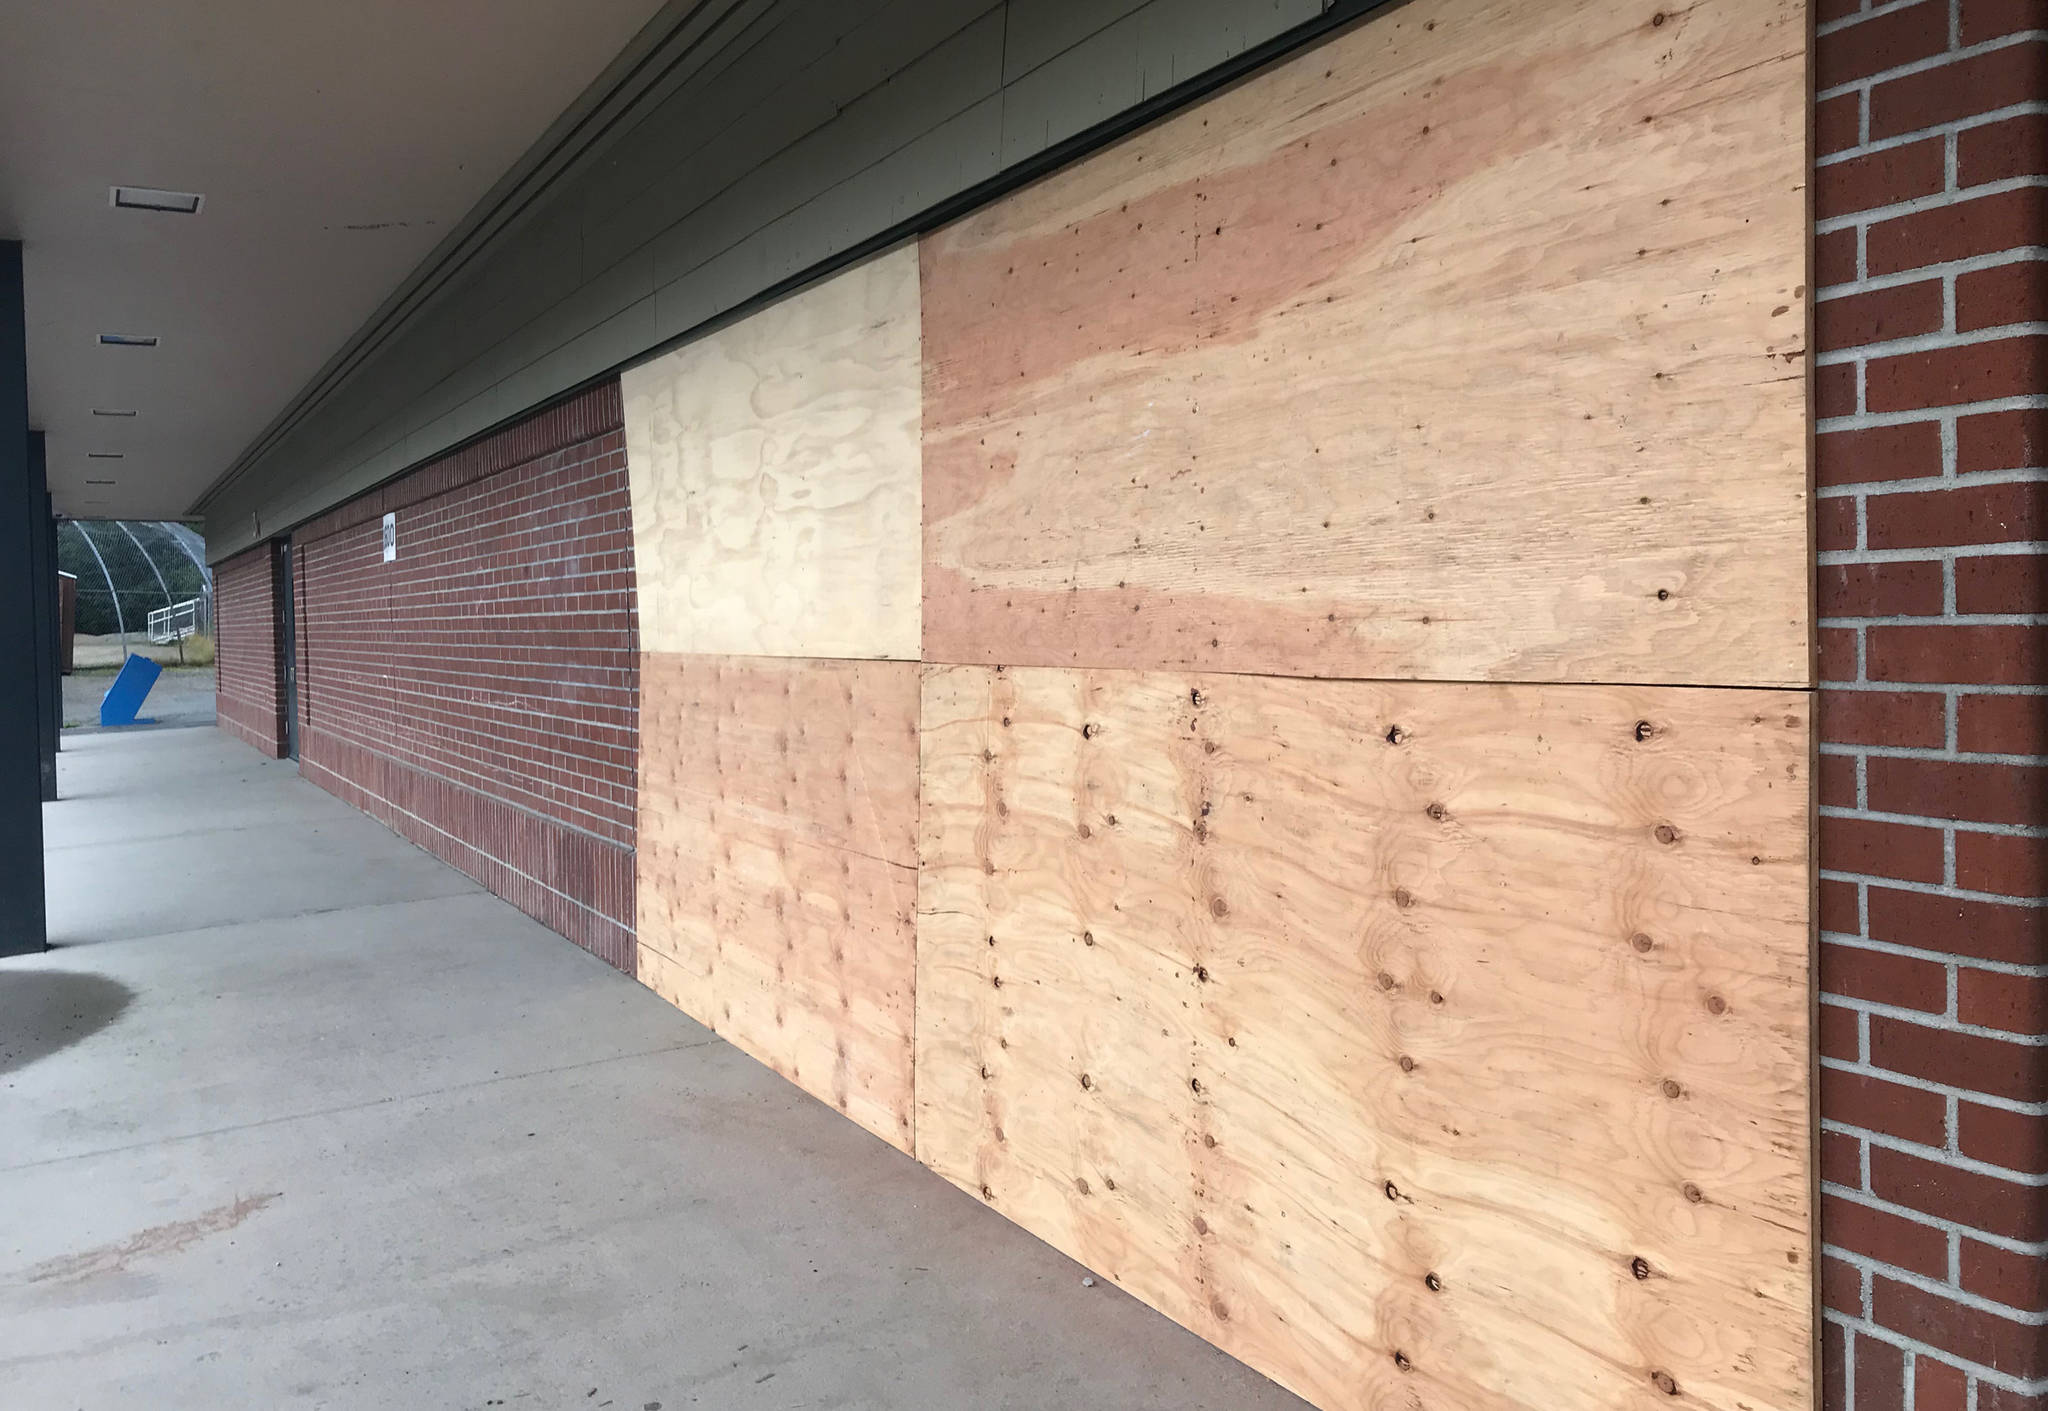 Wooden boards cover up damage made by a drunk driver at Dzantik’i Heeni Middle School on Tuesday, Aug. 7, 2018. The crash occurred July 31, police say. (Alex McCarthy | Juneau Empire)